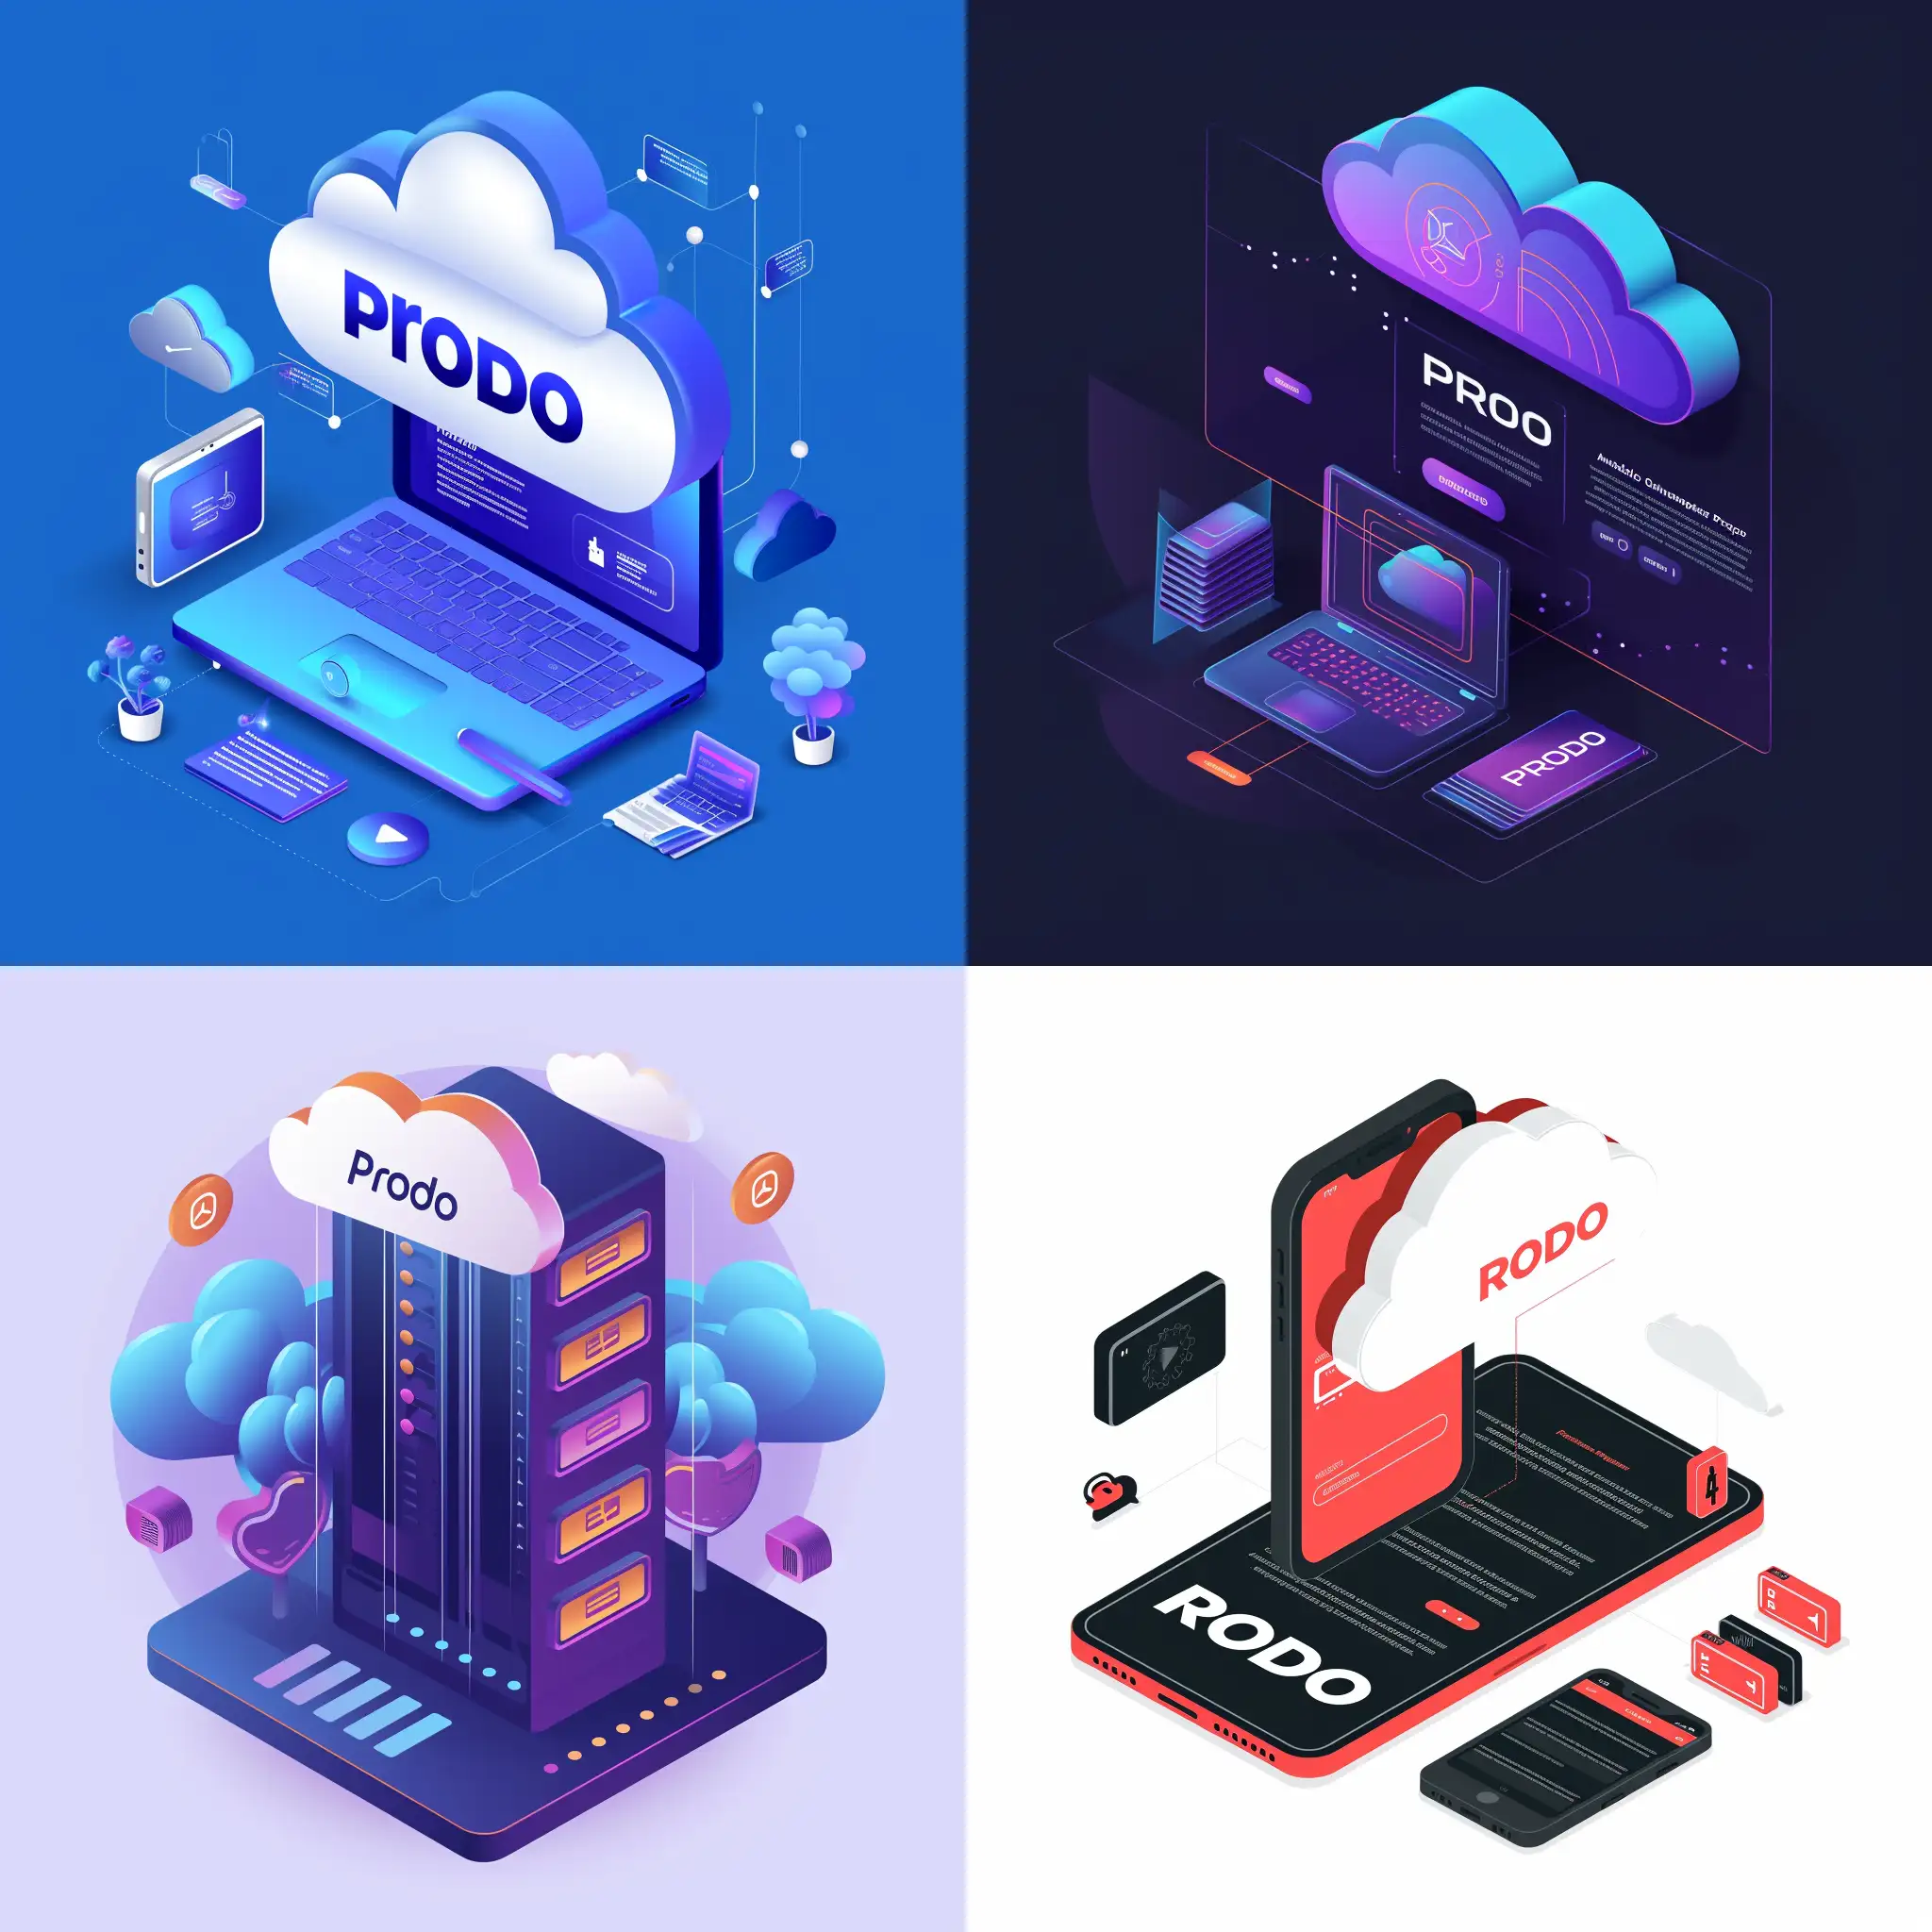 Create a design for my website cloud storage called Prodo